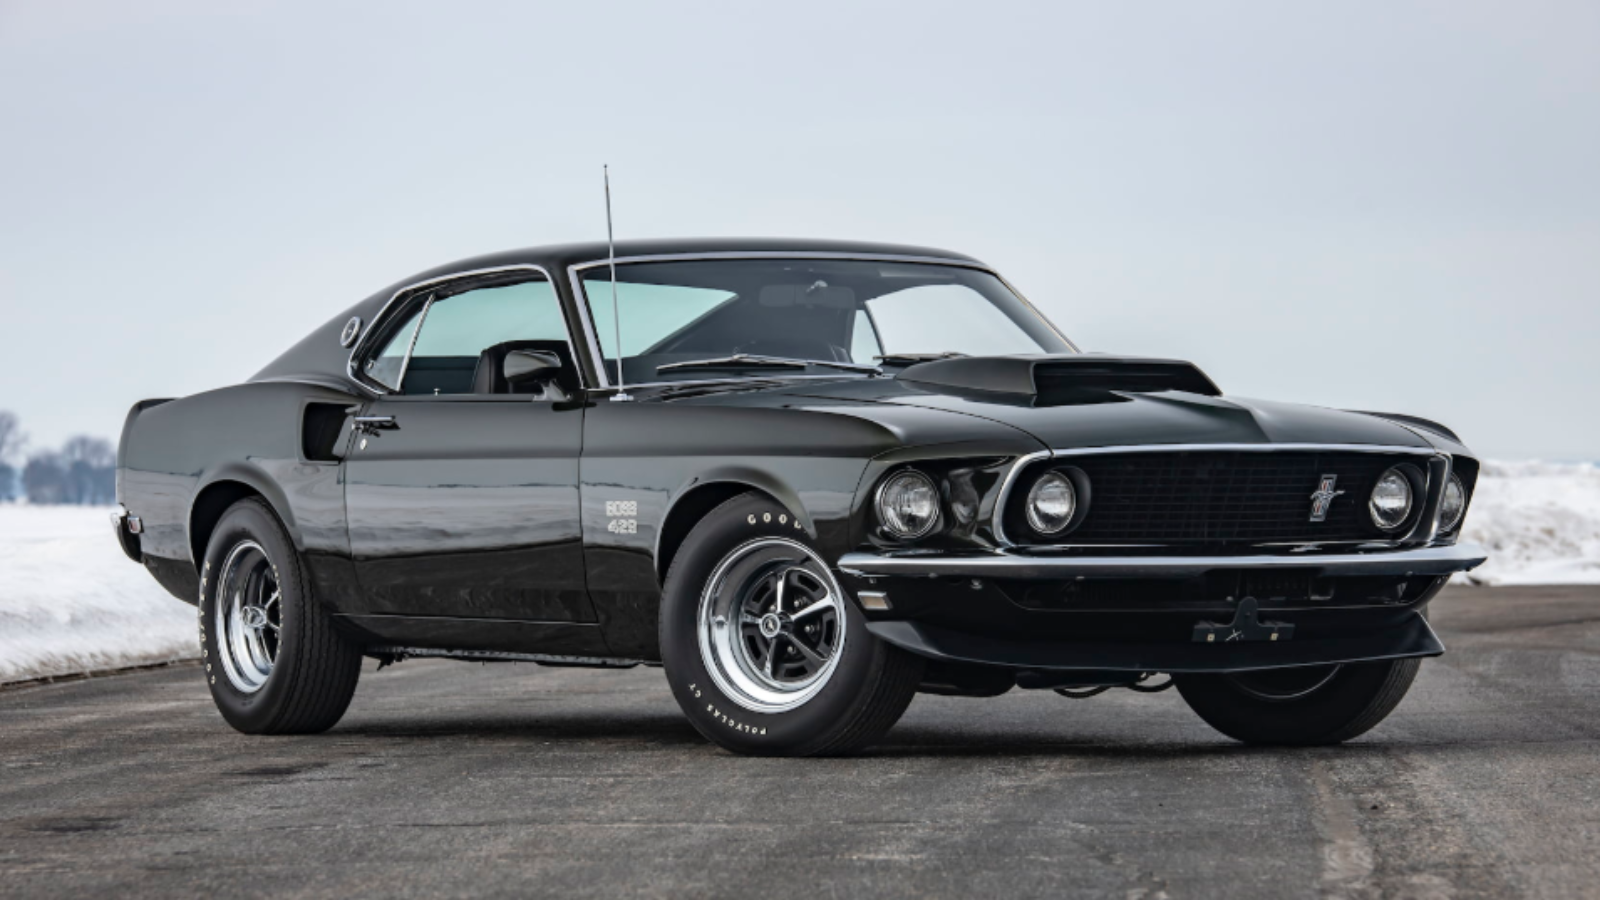 1969 Mustang BOSS 429 is a Stunning Fastback | Themustangsource